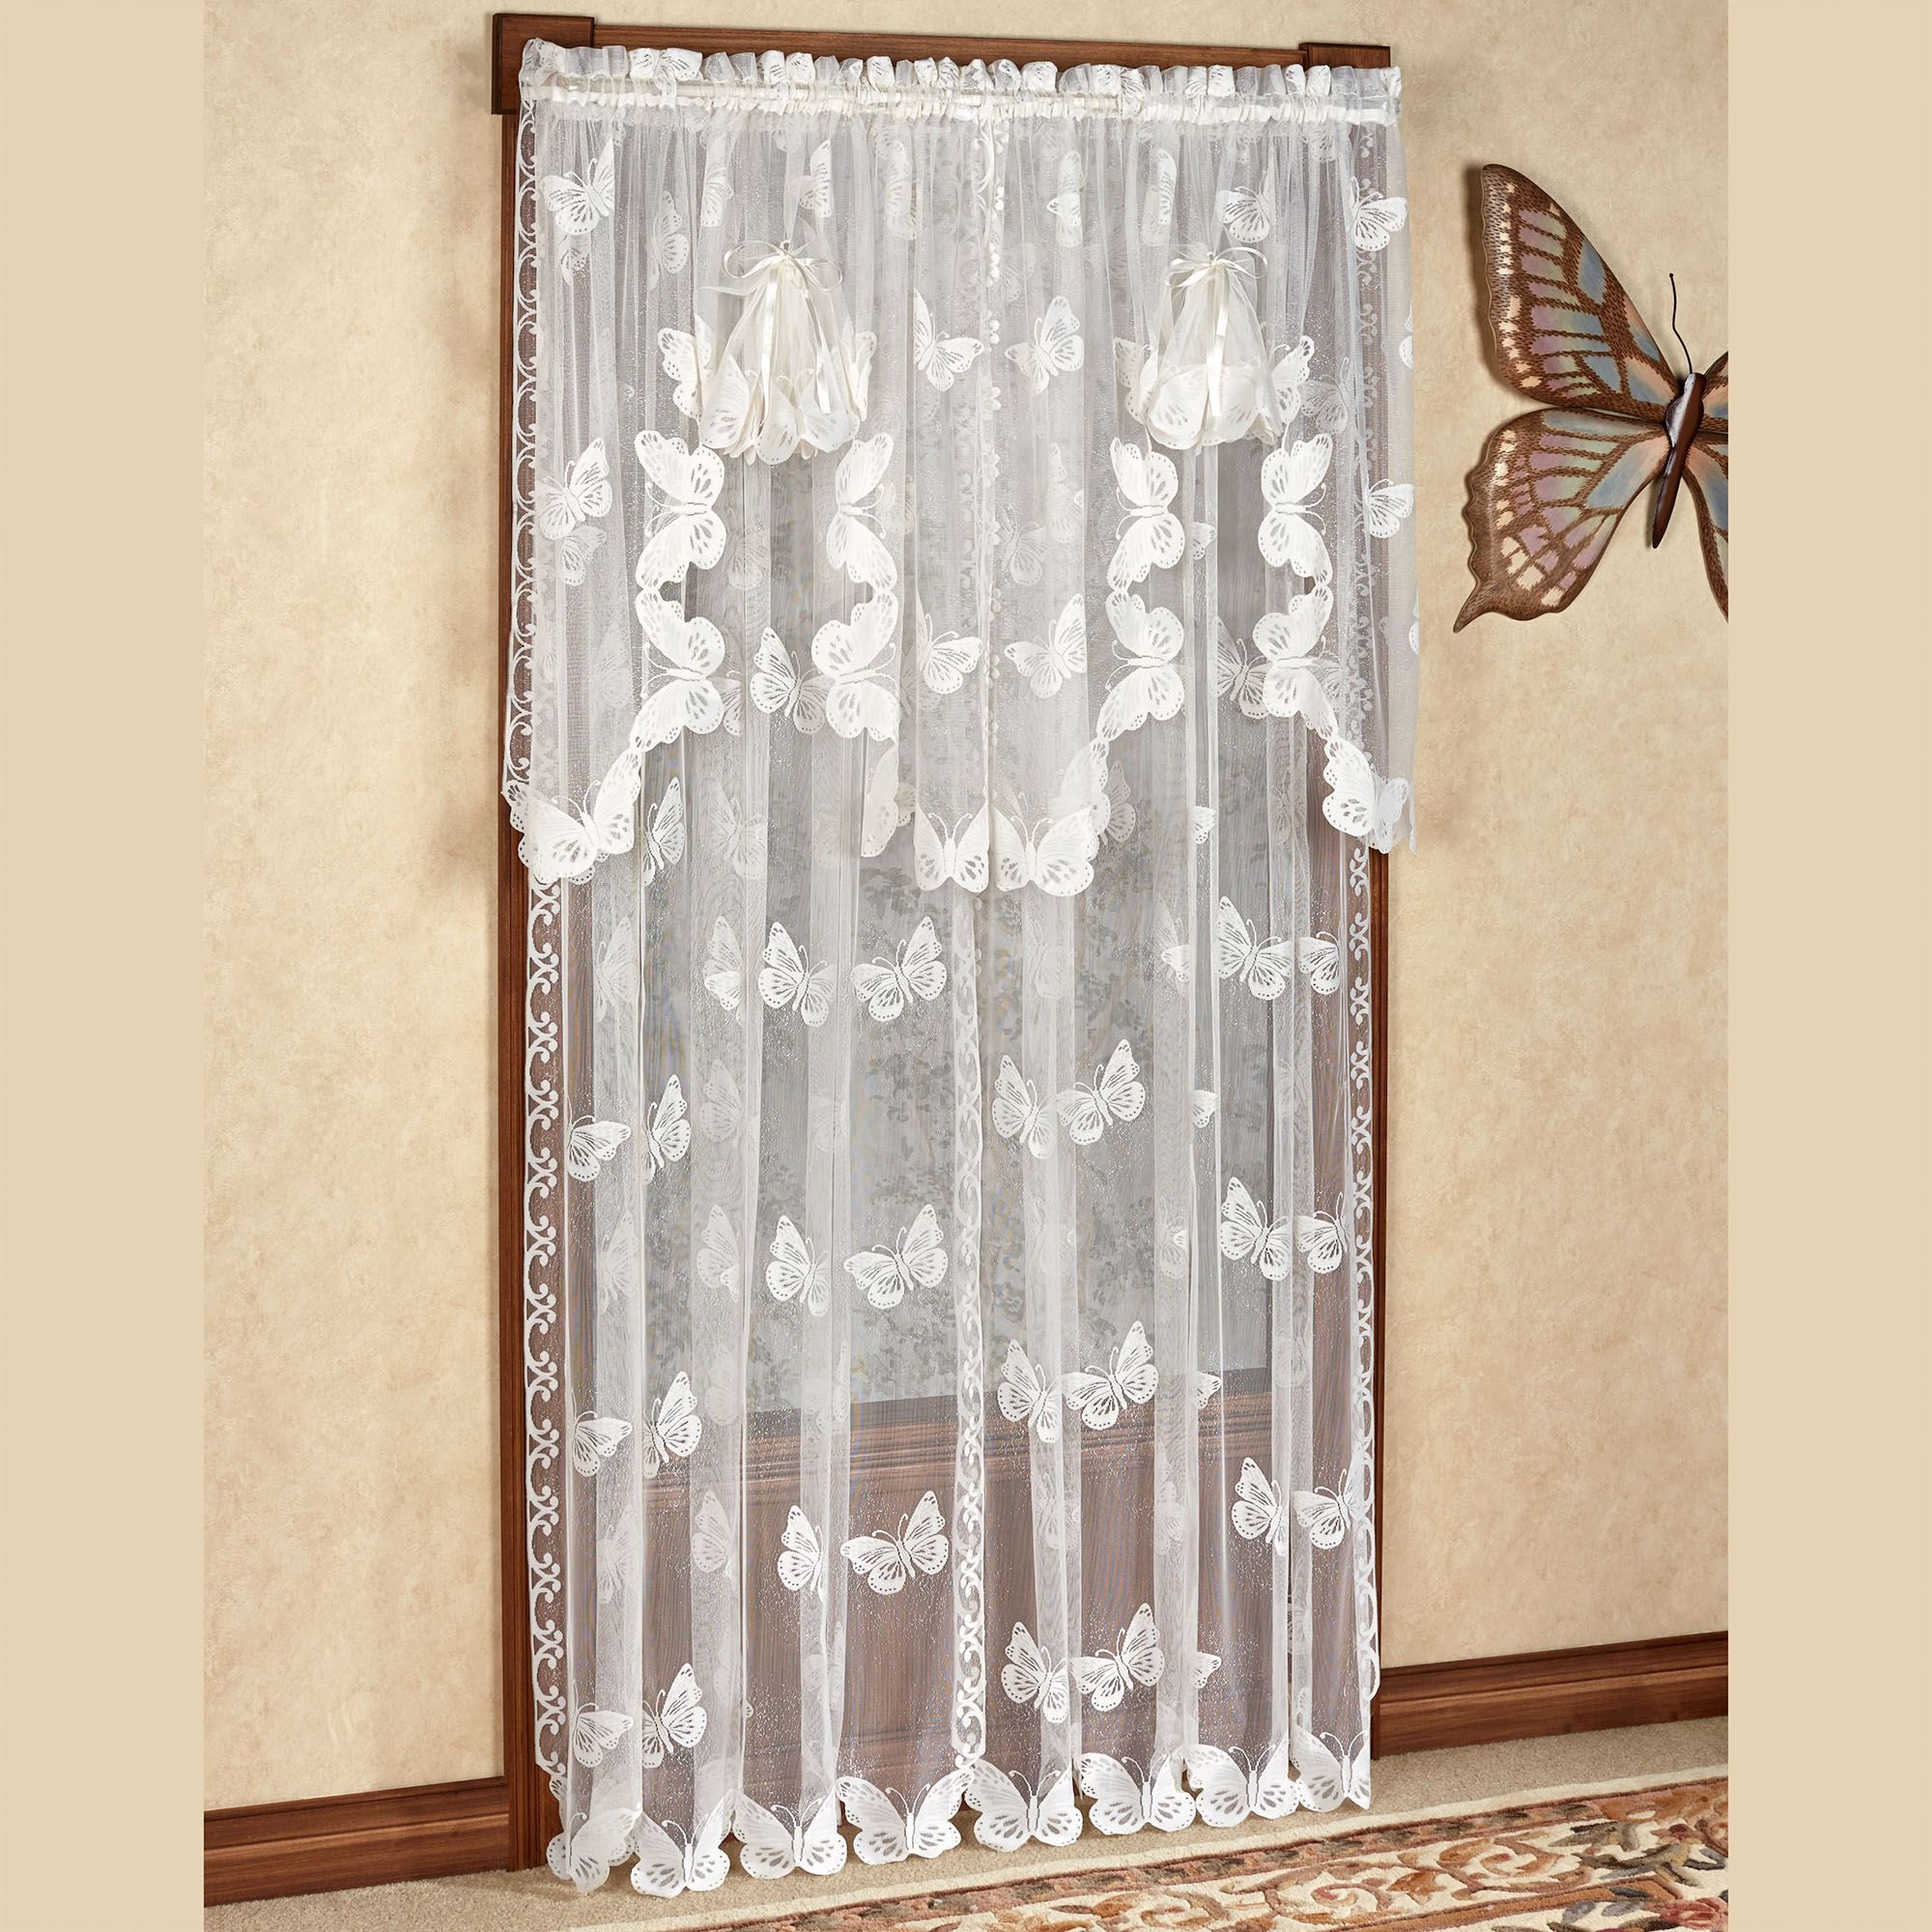 Curtains With Butterflies #am19 – Roccommunity Inside Fluttering Butterfly White Embroidered Tier, Swag, Or Valance Kitchen Curtains (View 19 of 20)